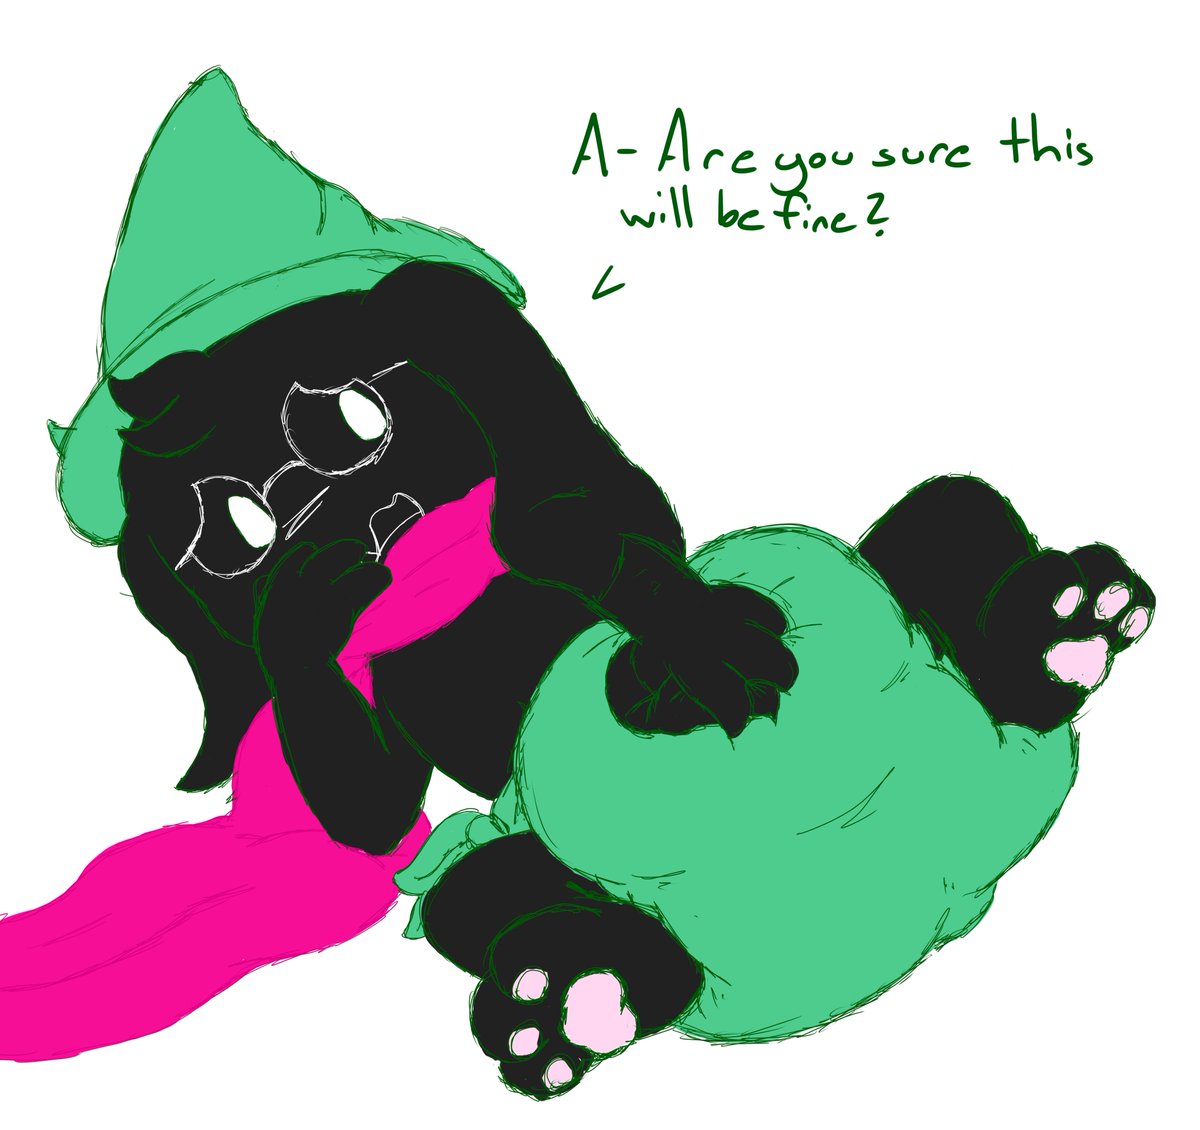 More pictures of diapered ralsei.what?? 